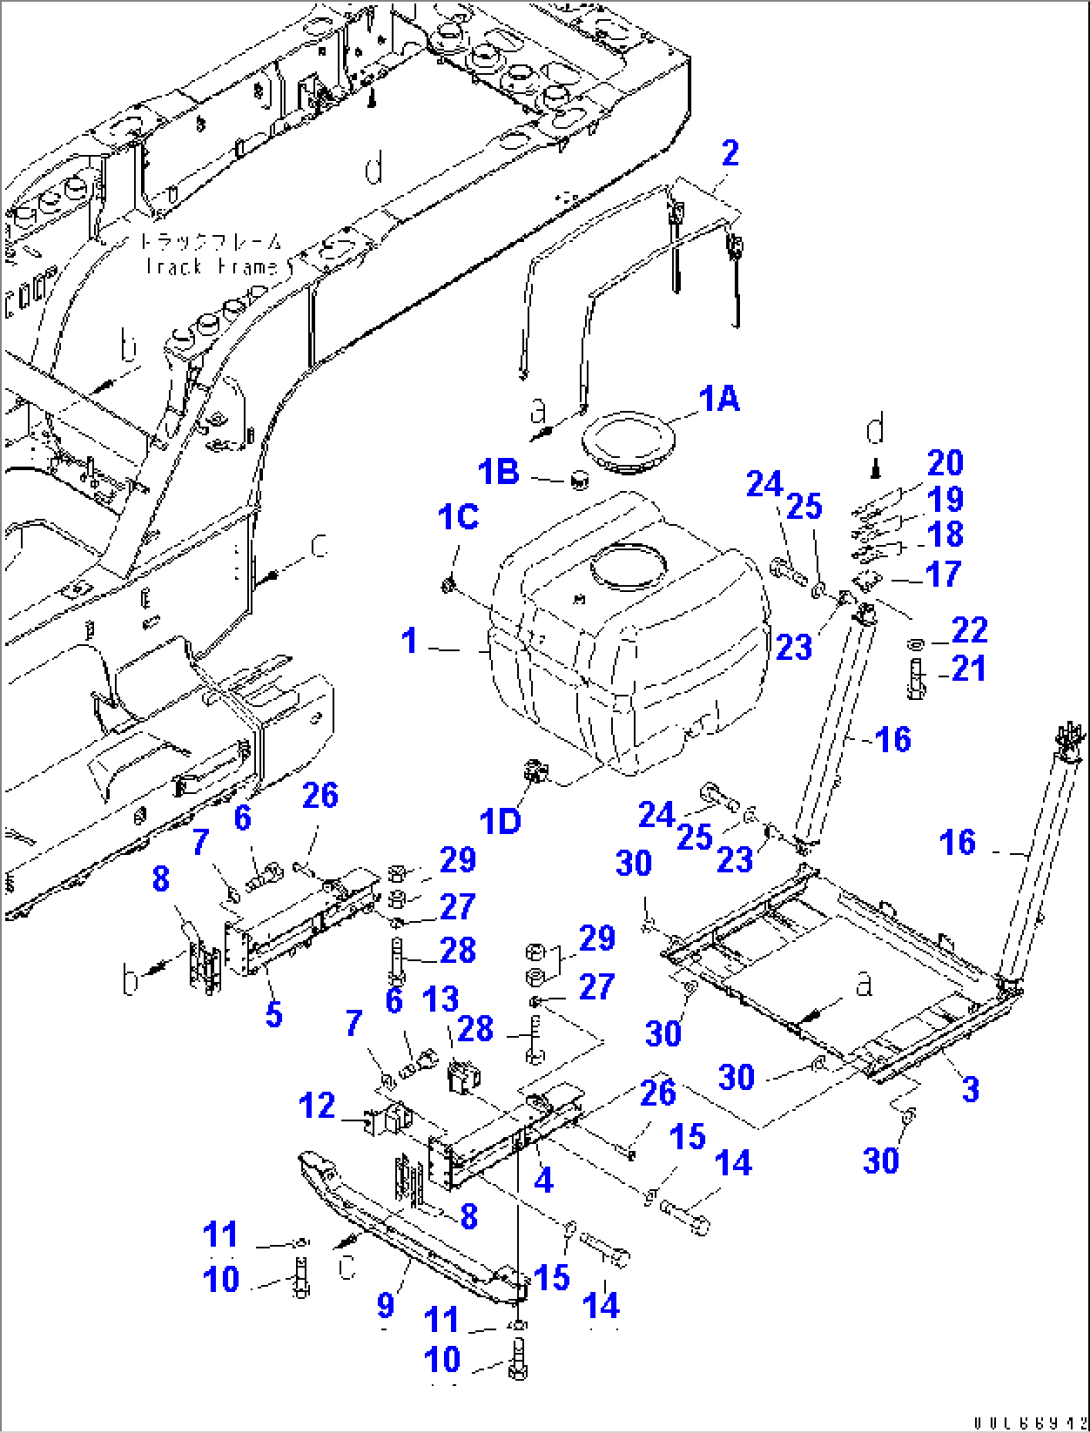 WATER TANK AND PUMP (TANK AND BRACKET)(#1001-)